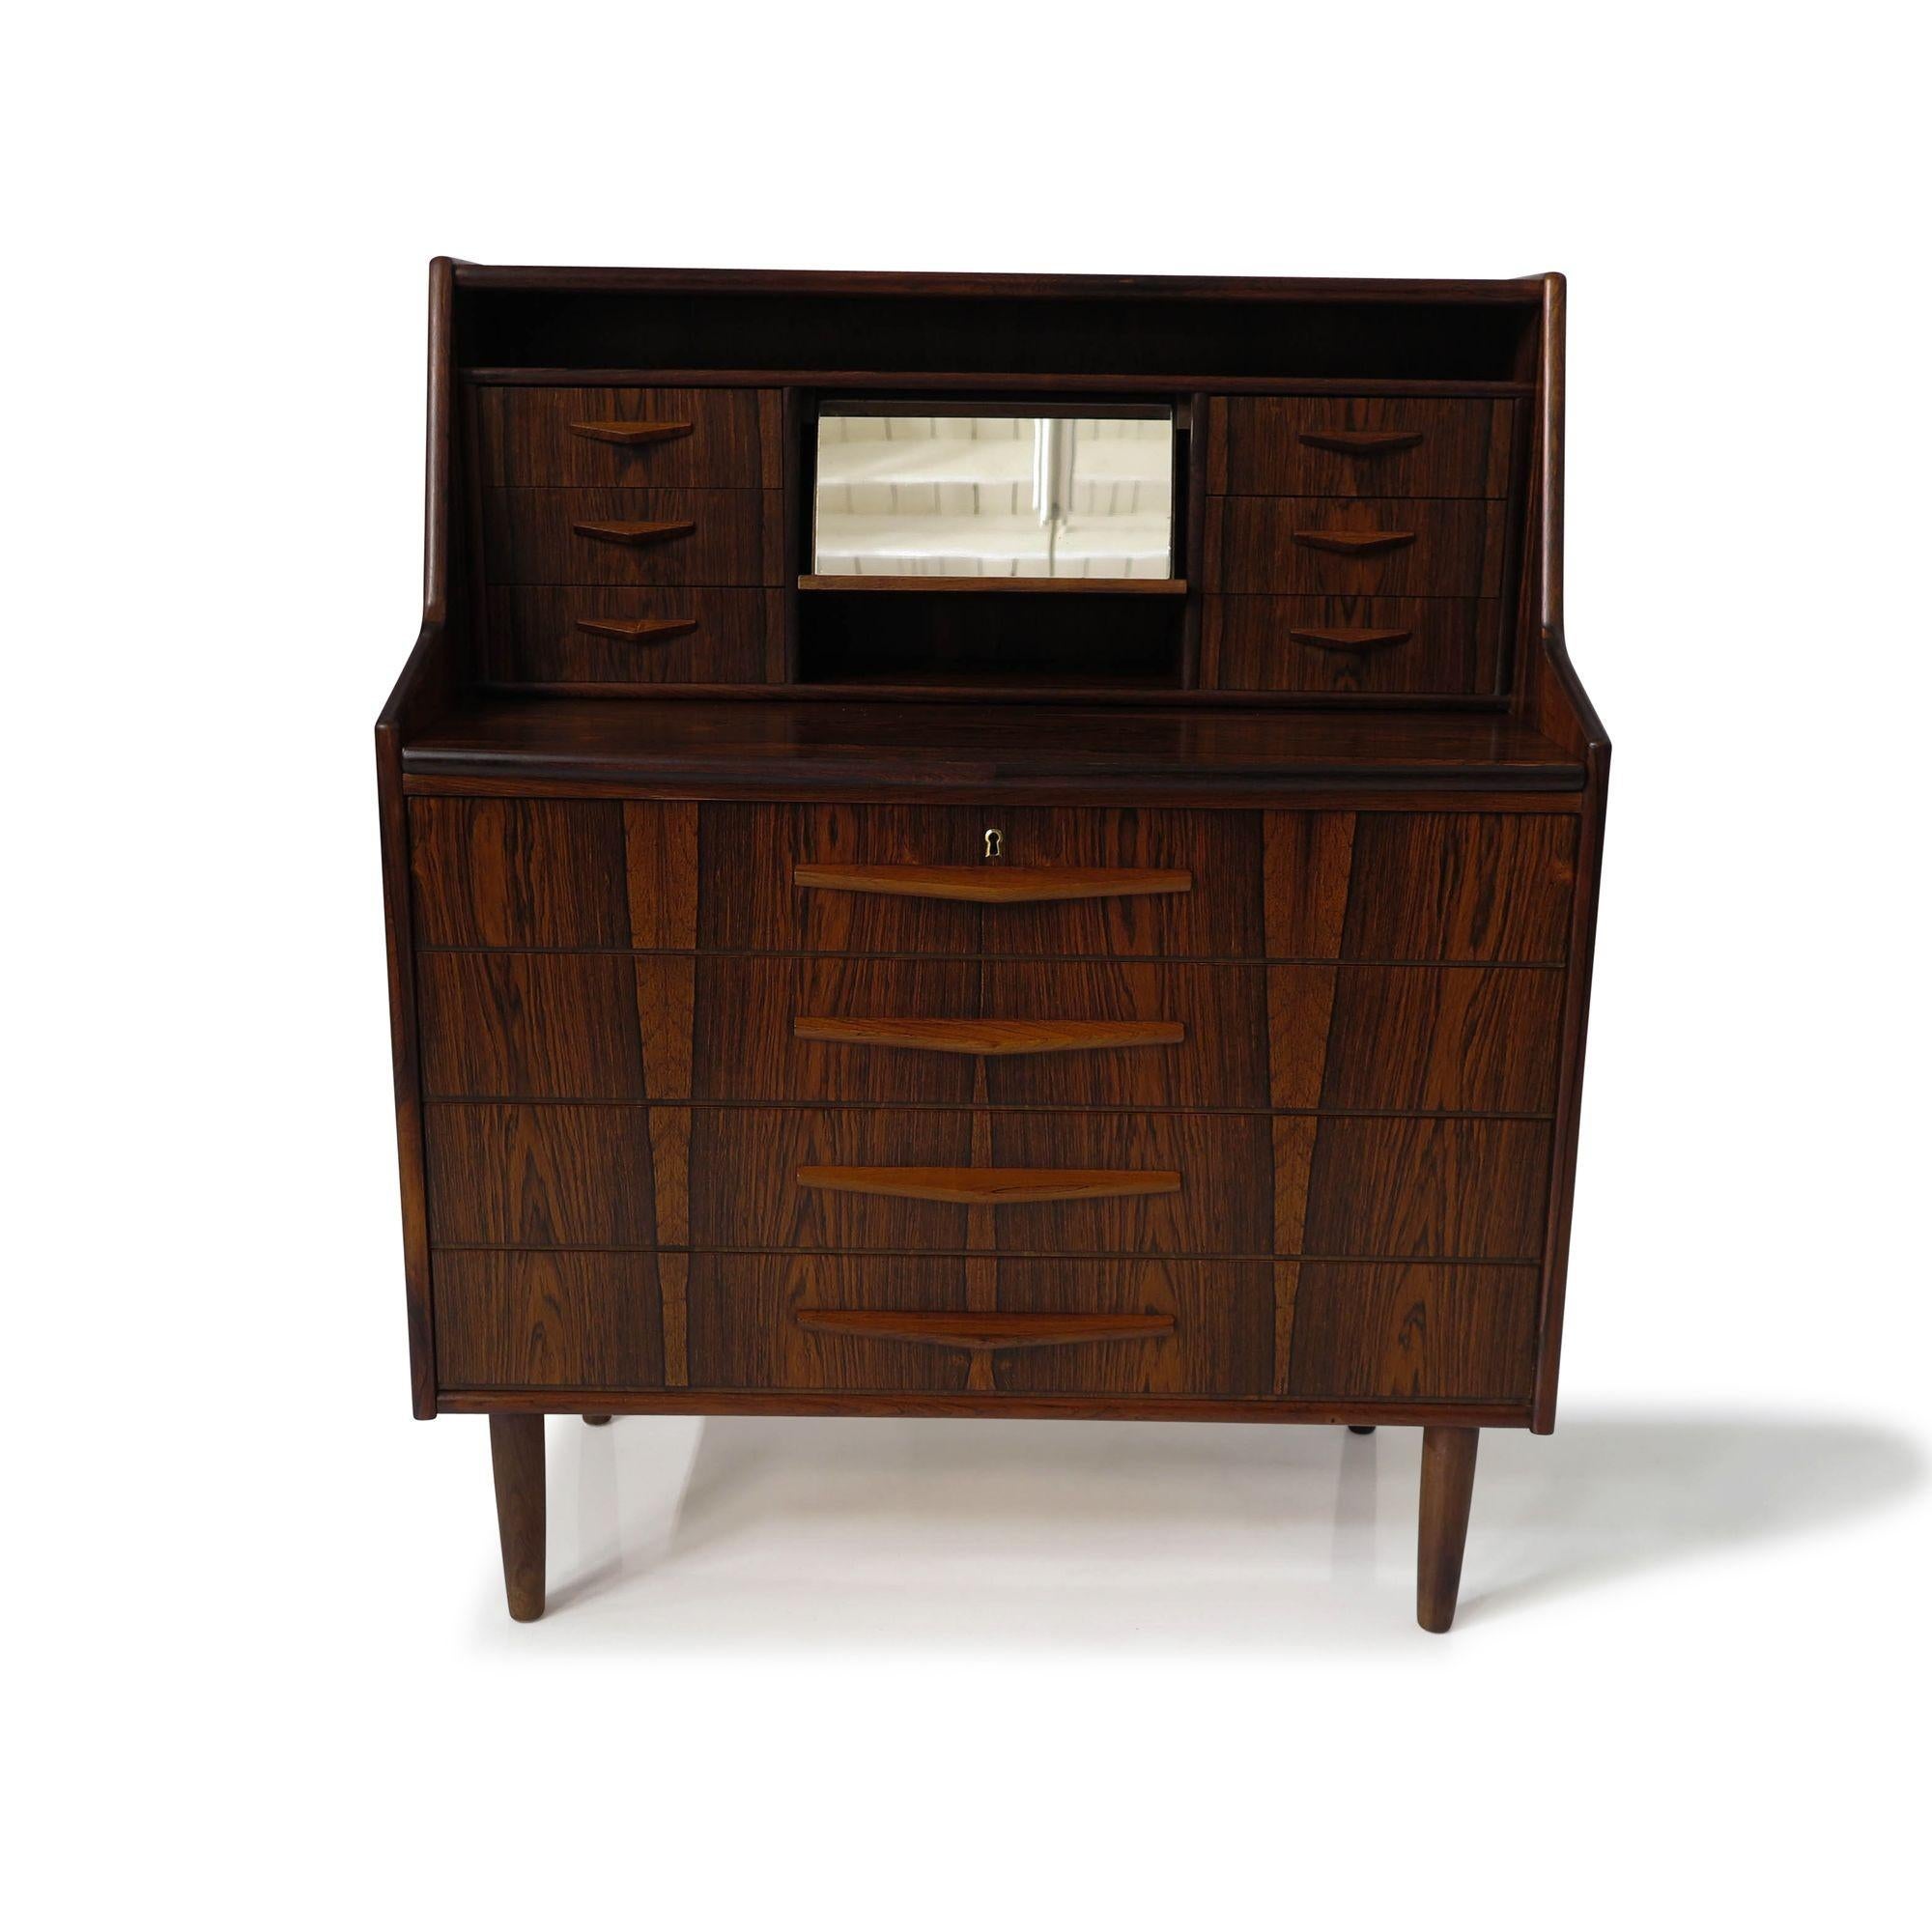 Brazilian rosewood secretary desk, 1955, Denmark. Crafted with exquisite attention to detail, it showcases stunning Brazilian rosewood with dark grains and dynamic book-matched patterns on the drawer fronts and sides. The secretary boasts six small